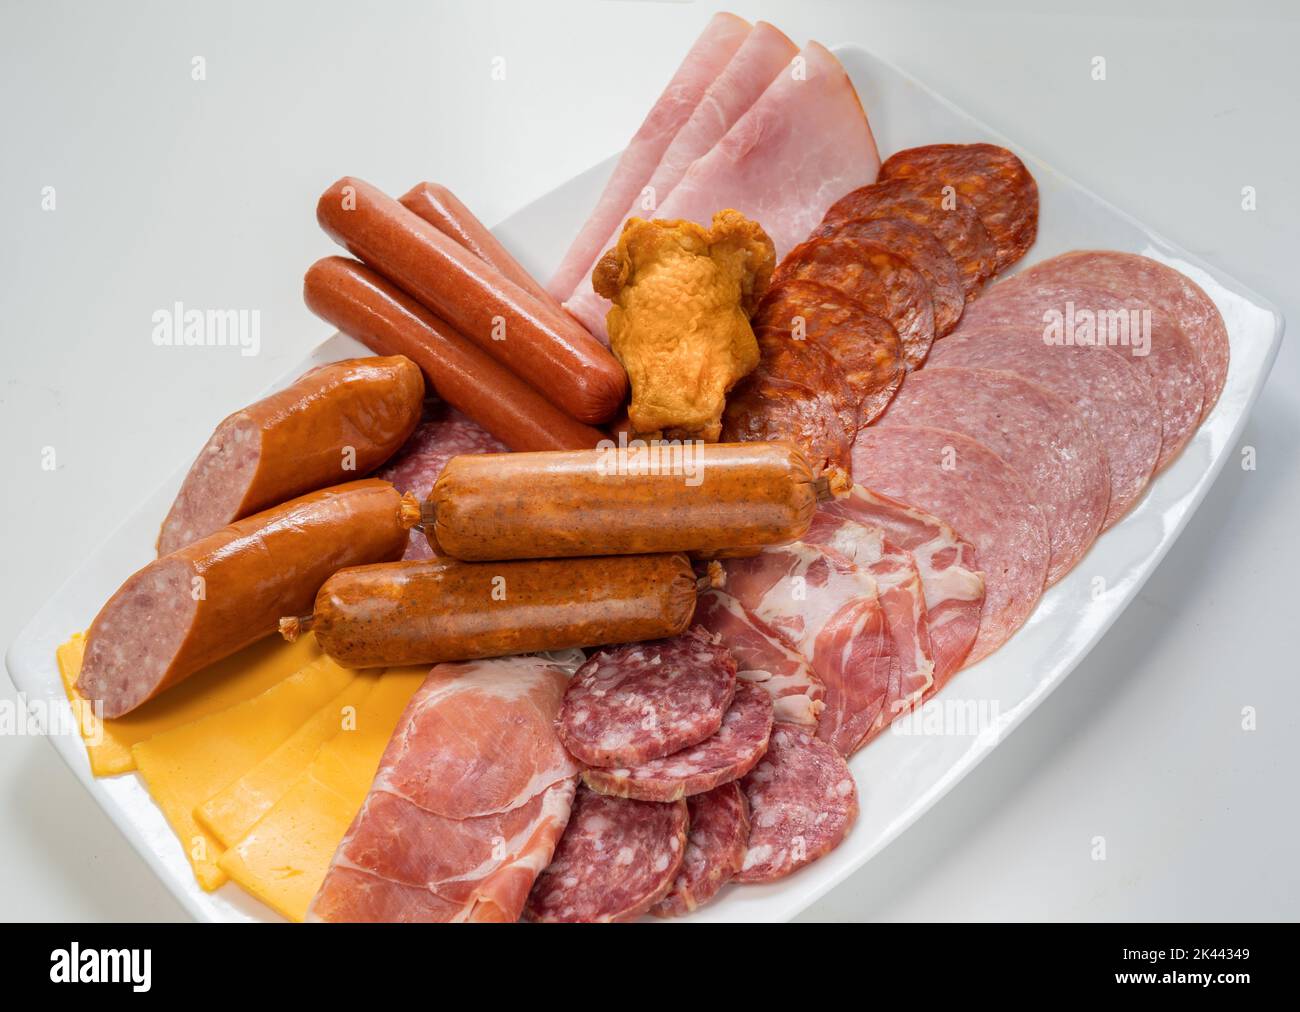 Plate filled with unhealthy processed meats and cheese Stock Photo